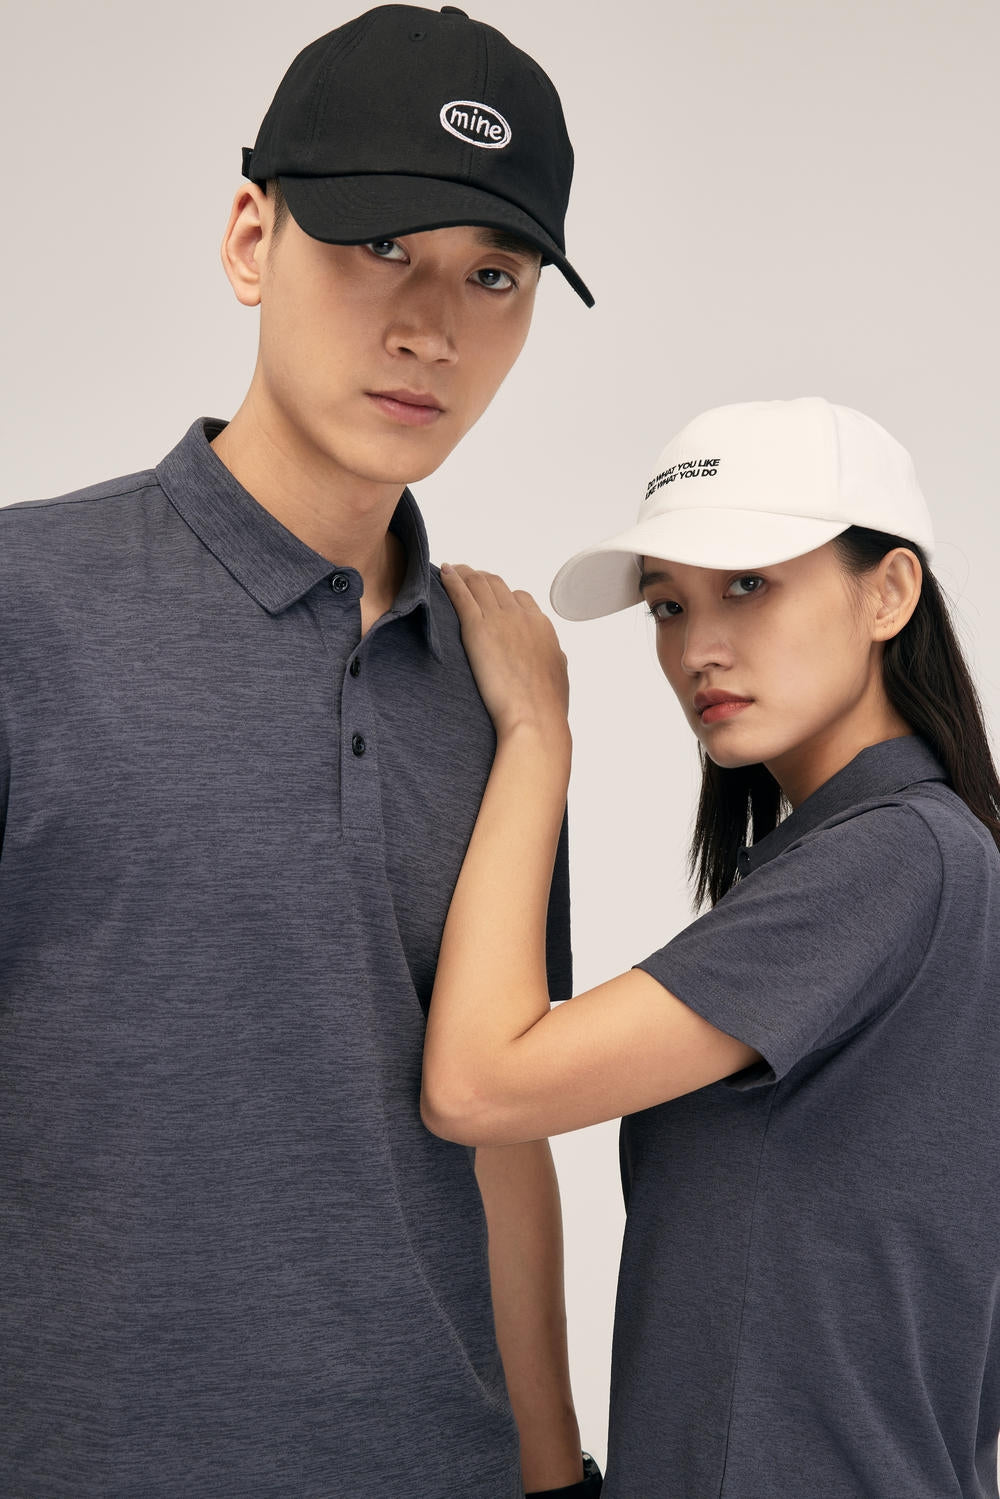 Custom Team Polo Shirts Print With Your Own Logo, The Polo shirts for men and women.